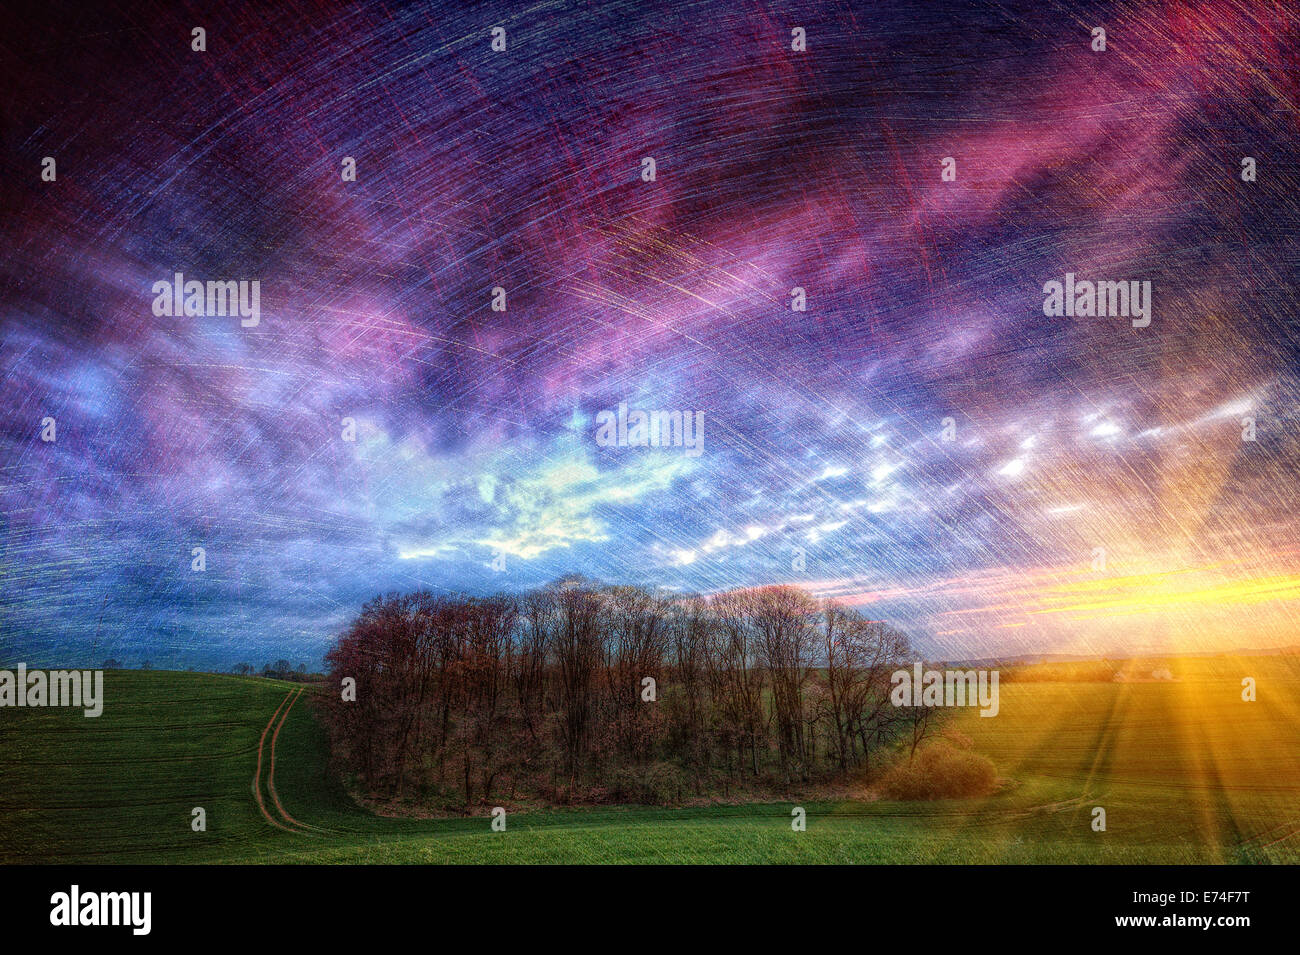 Sunset over green field with clouds in retro style Stock Photo